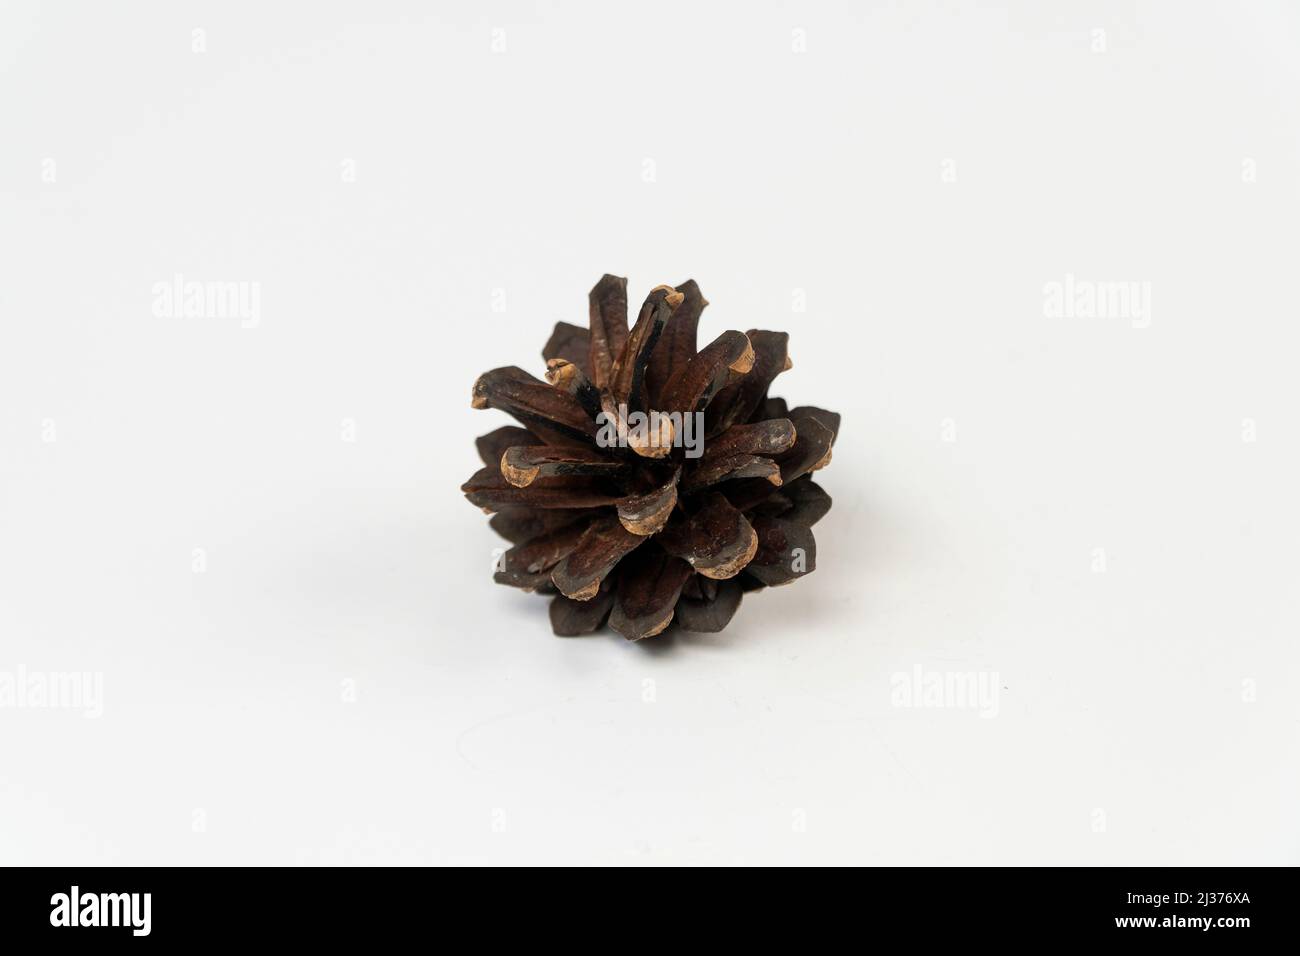 Pine cone isolated on white background, open pine tree cone, front view Stock Photo